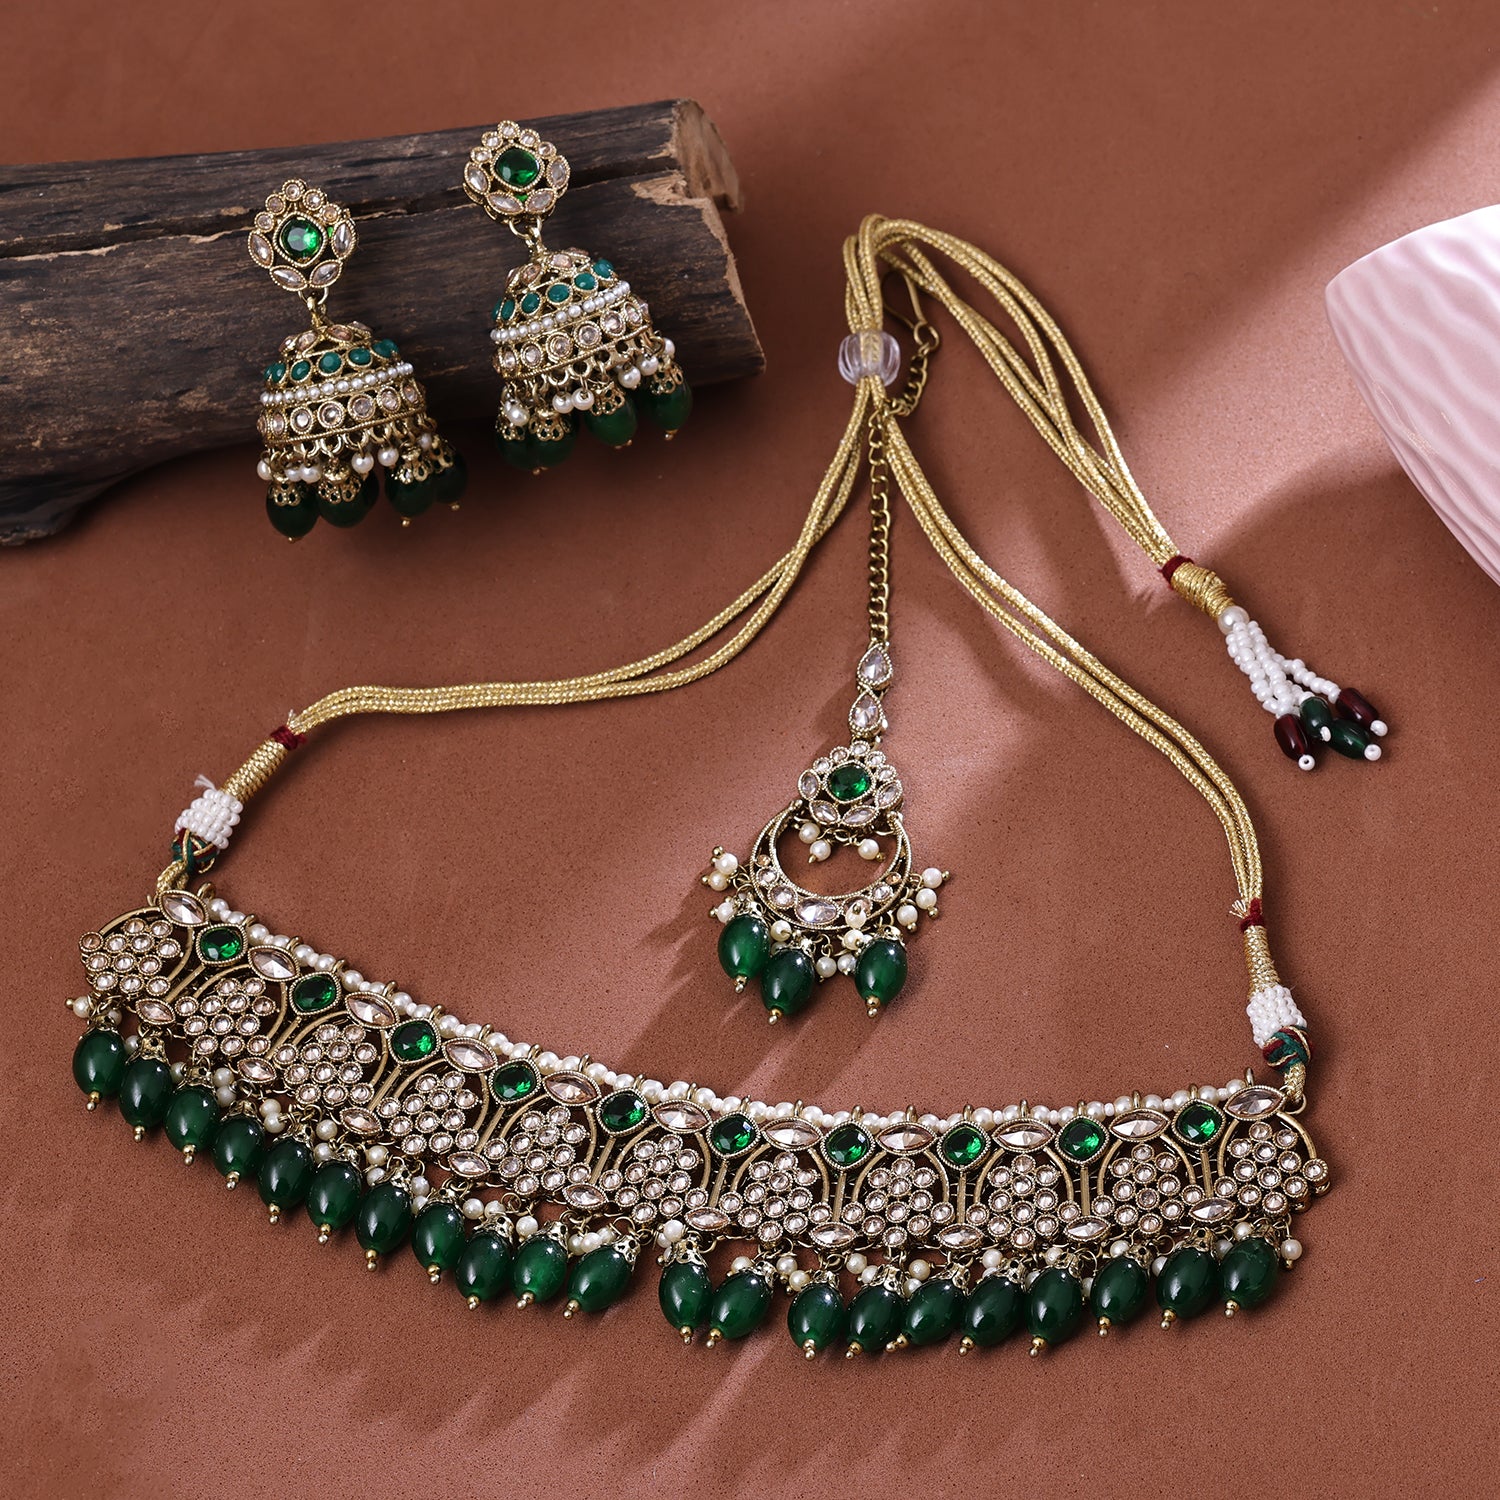 Green and White Beads Chain with Gold-Tone Pendant Adorned with Stones  Necklace Set – Rubans